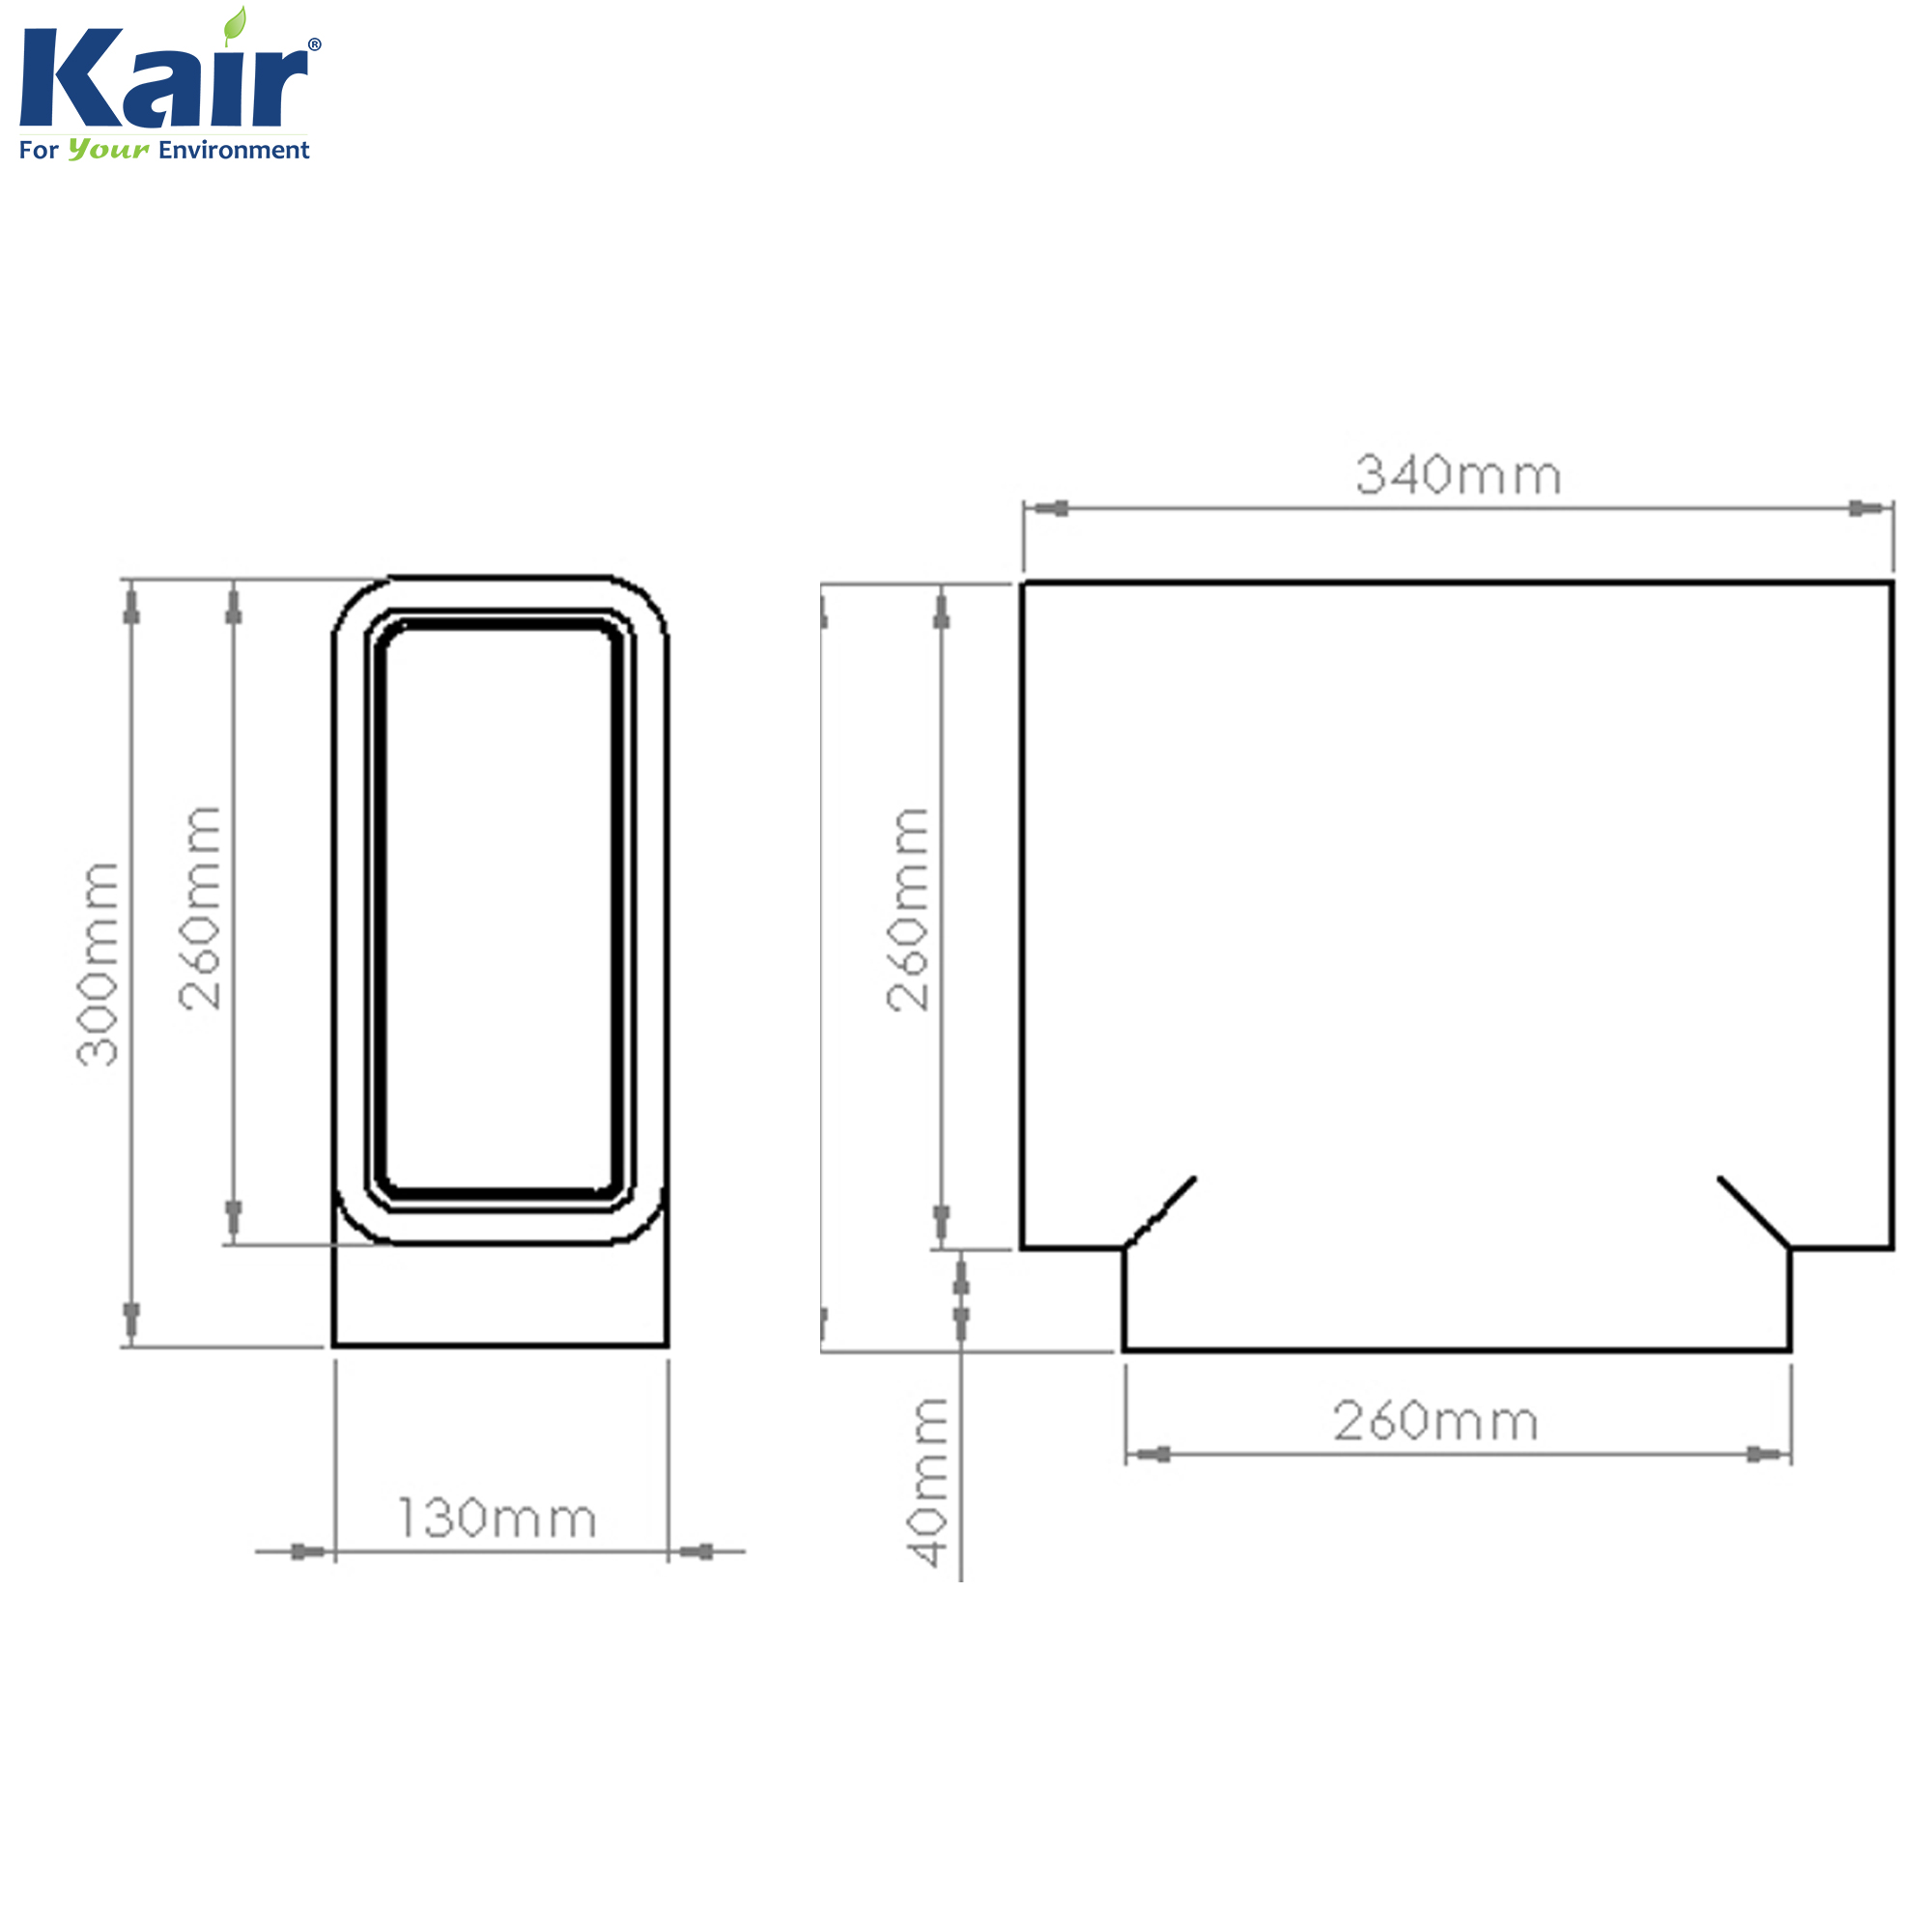 Kair Self-Seal Thermal Ducting 220X90mm T-Piece Complete With Female Click And Lock Fittings